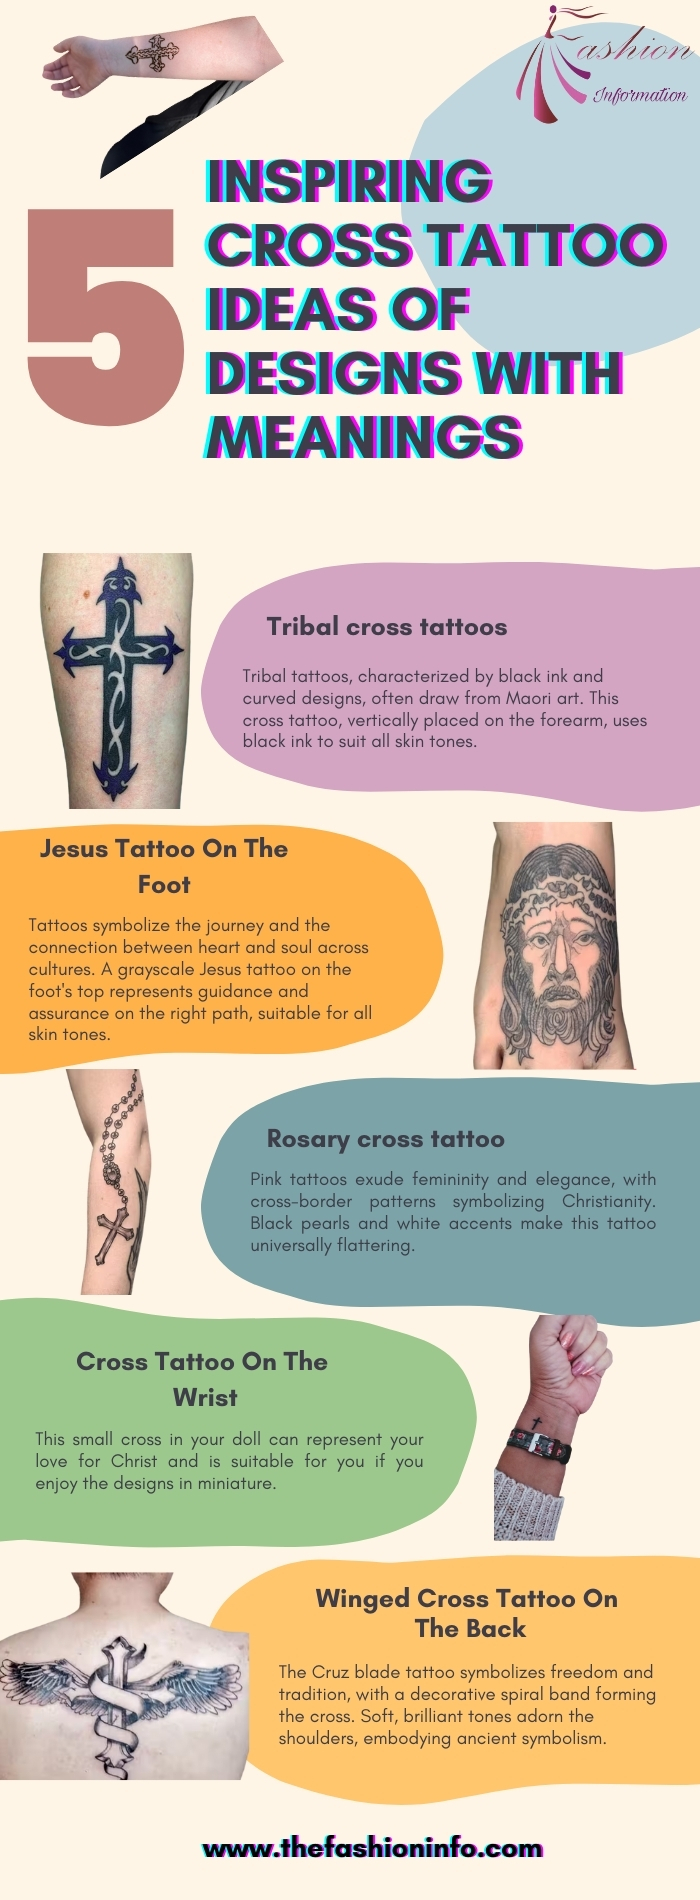 5 Inspiring Cross Tattoo Ideas of Designs With Meanings